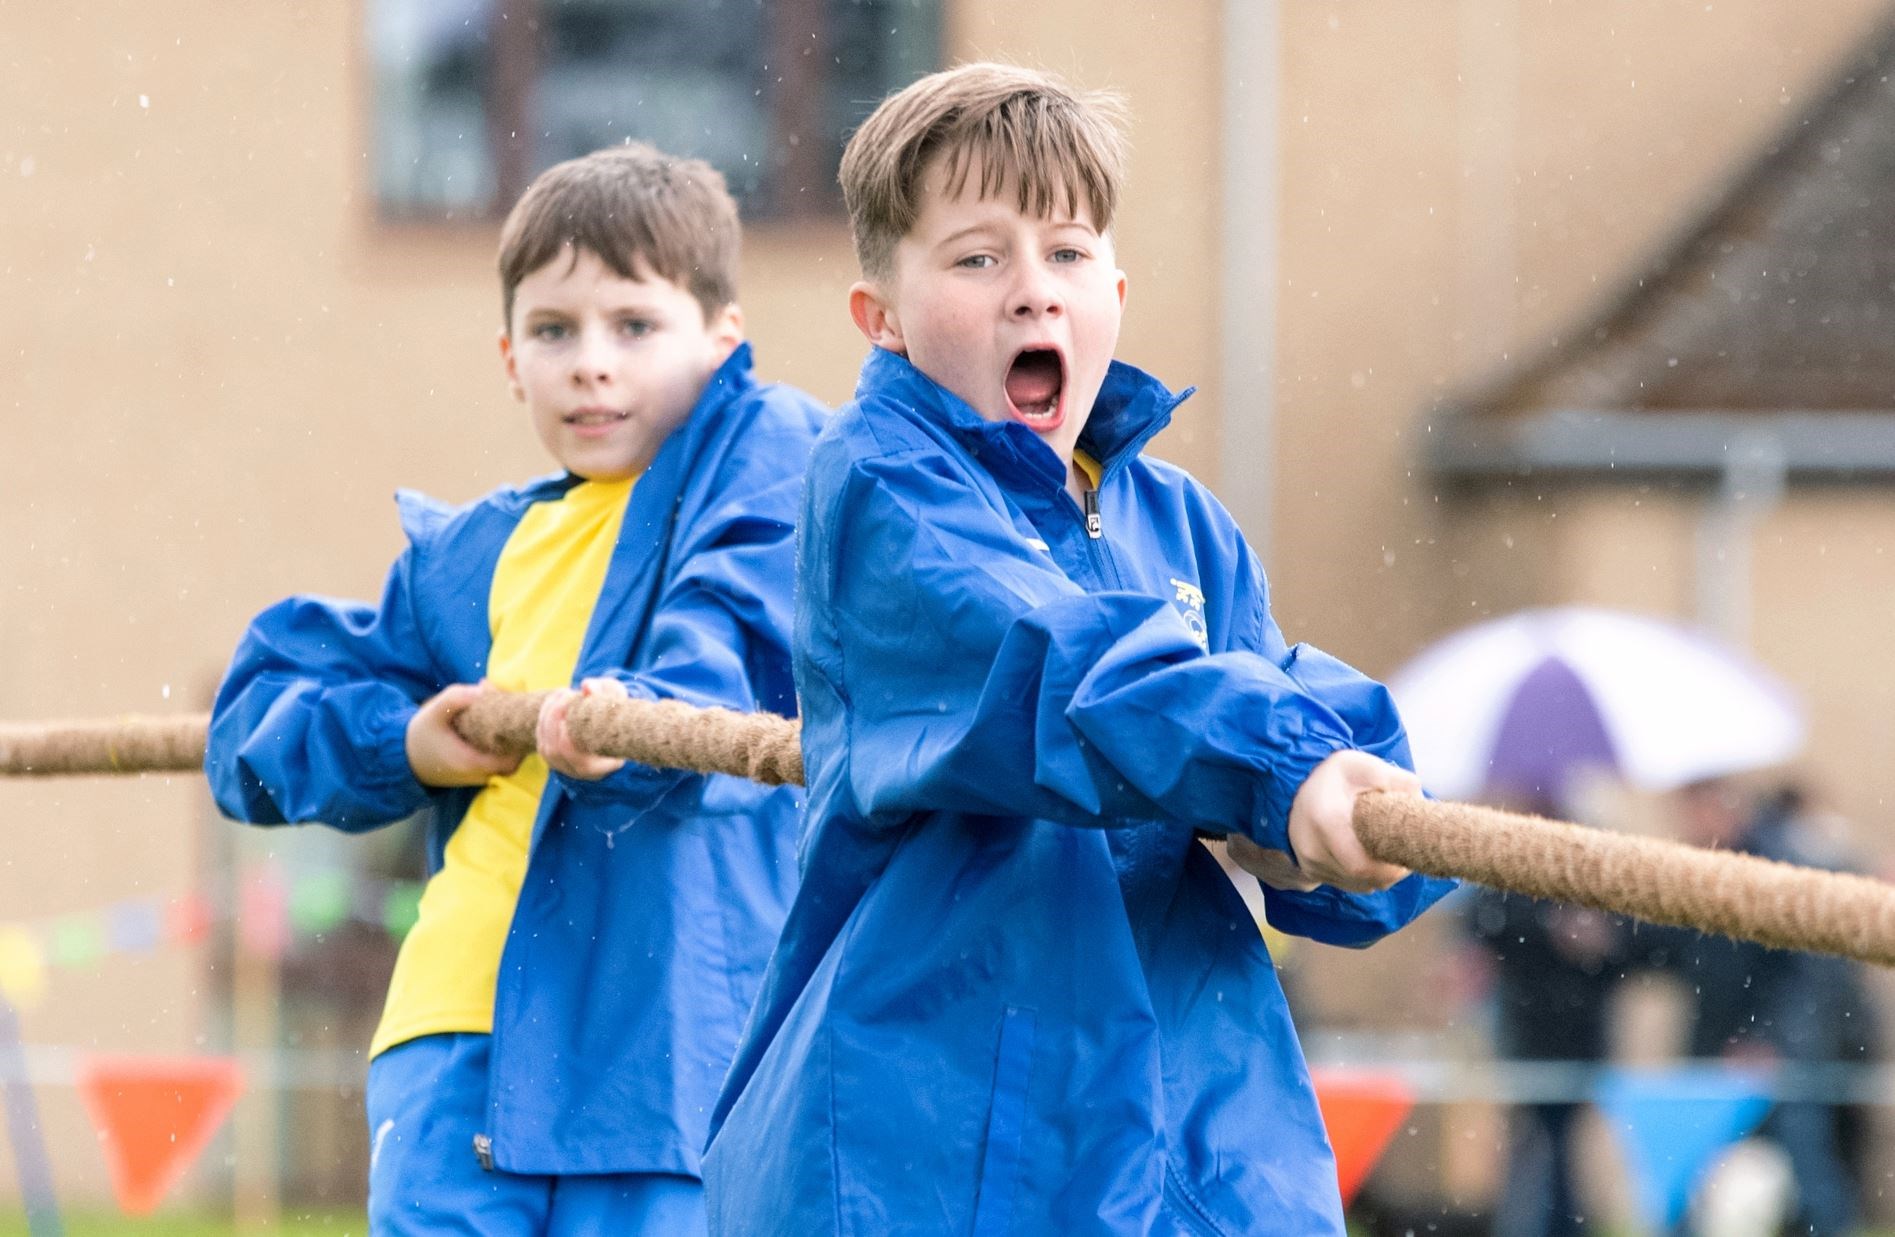 Xavier Thomas (left) and Daniel Hughes (right) from St Sylvesters' Primary School compete in the Tug O' War. Picture: Daniel Forsyth.